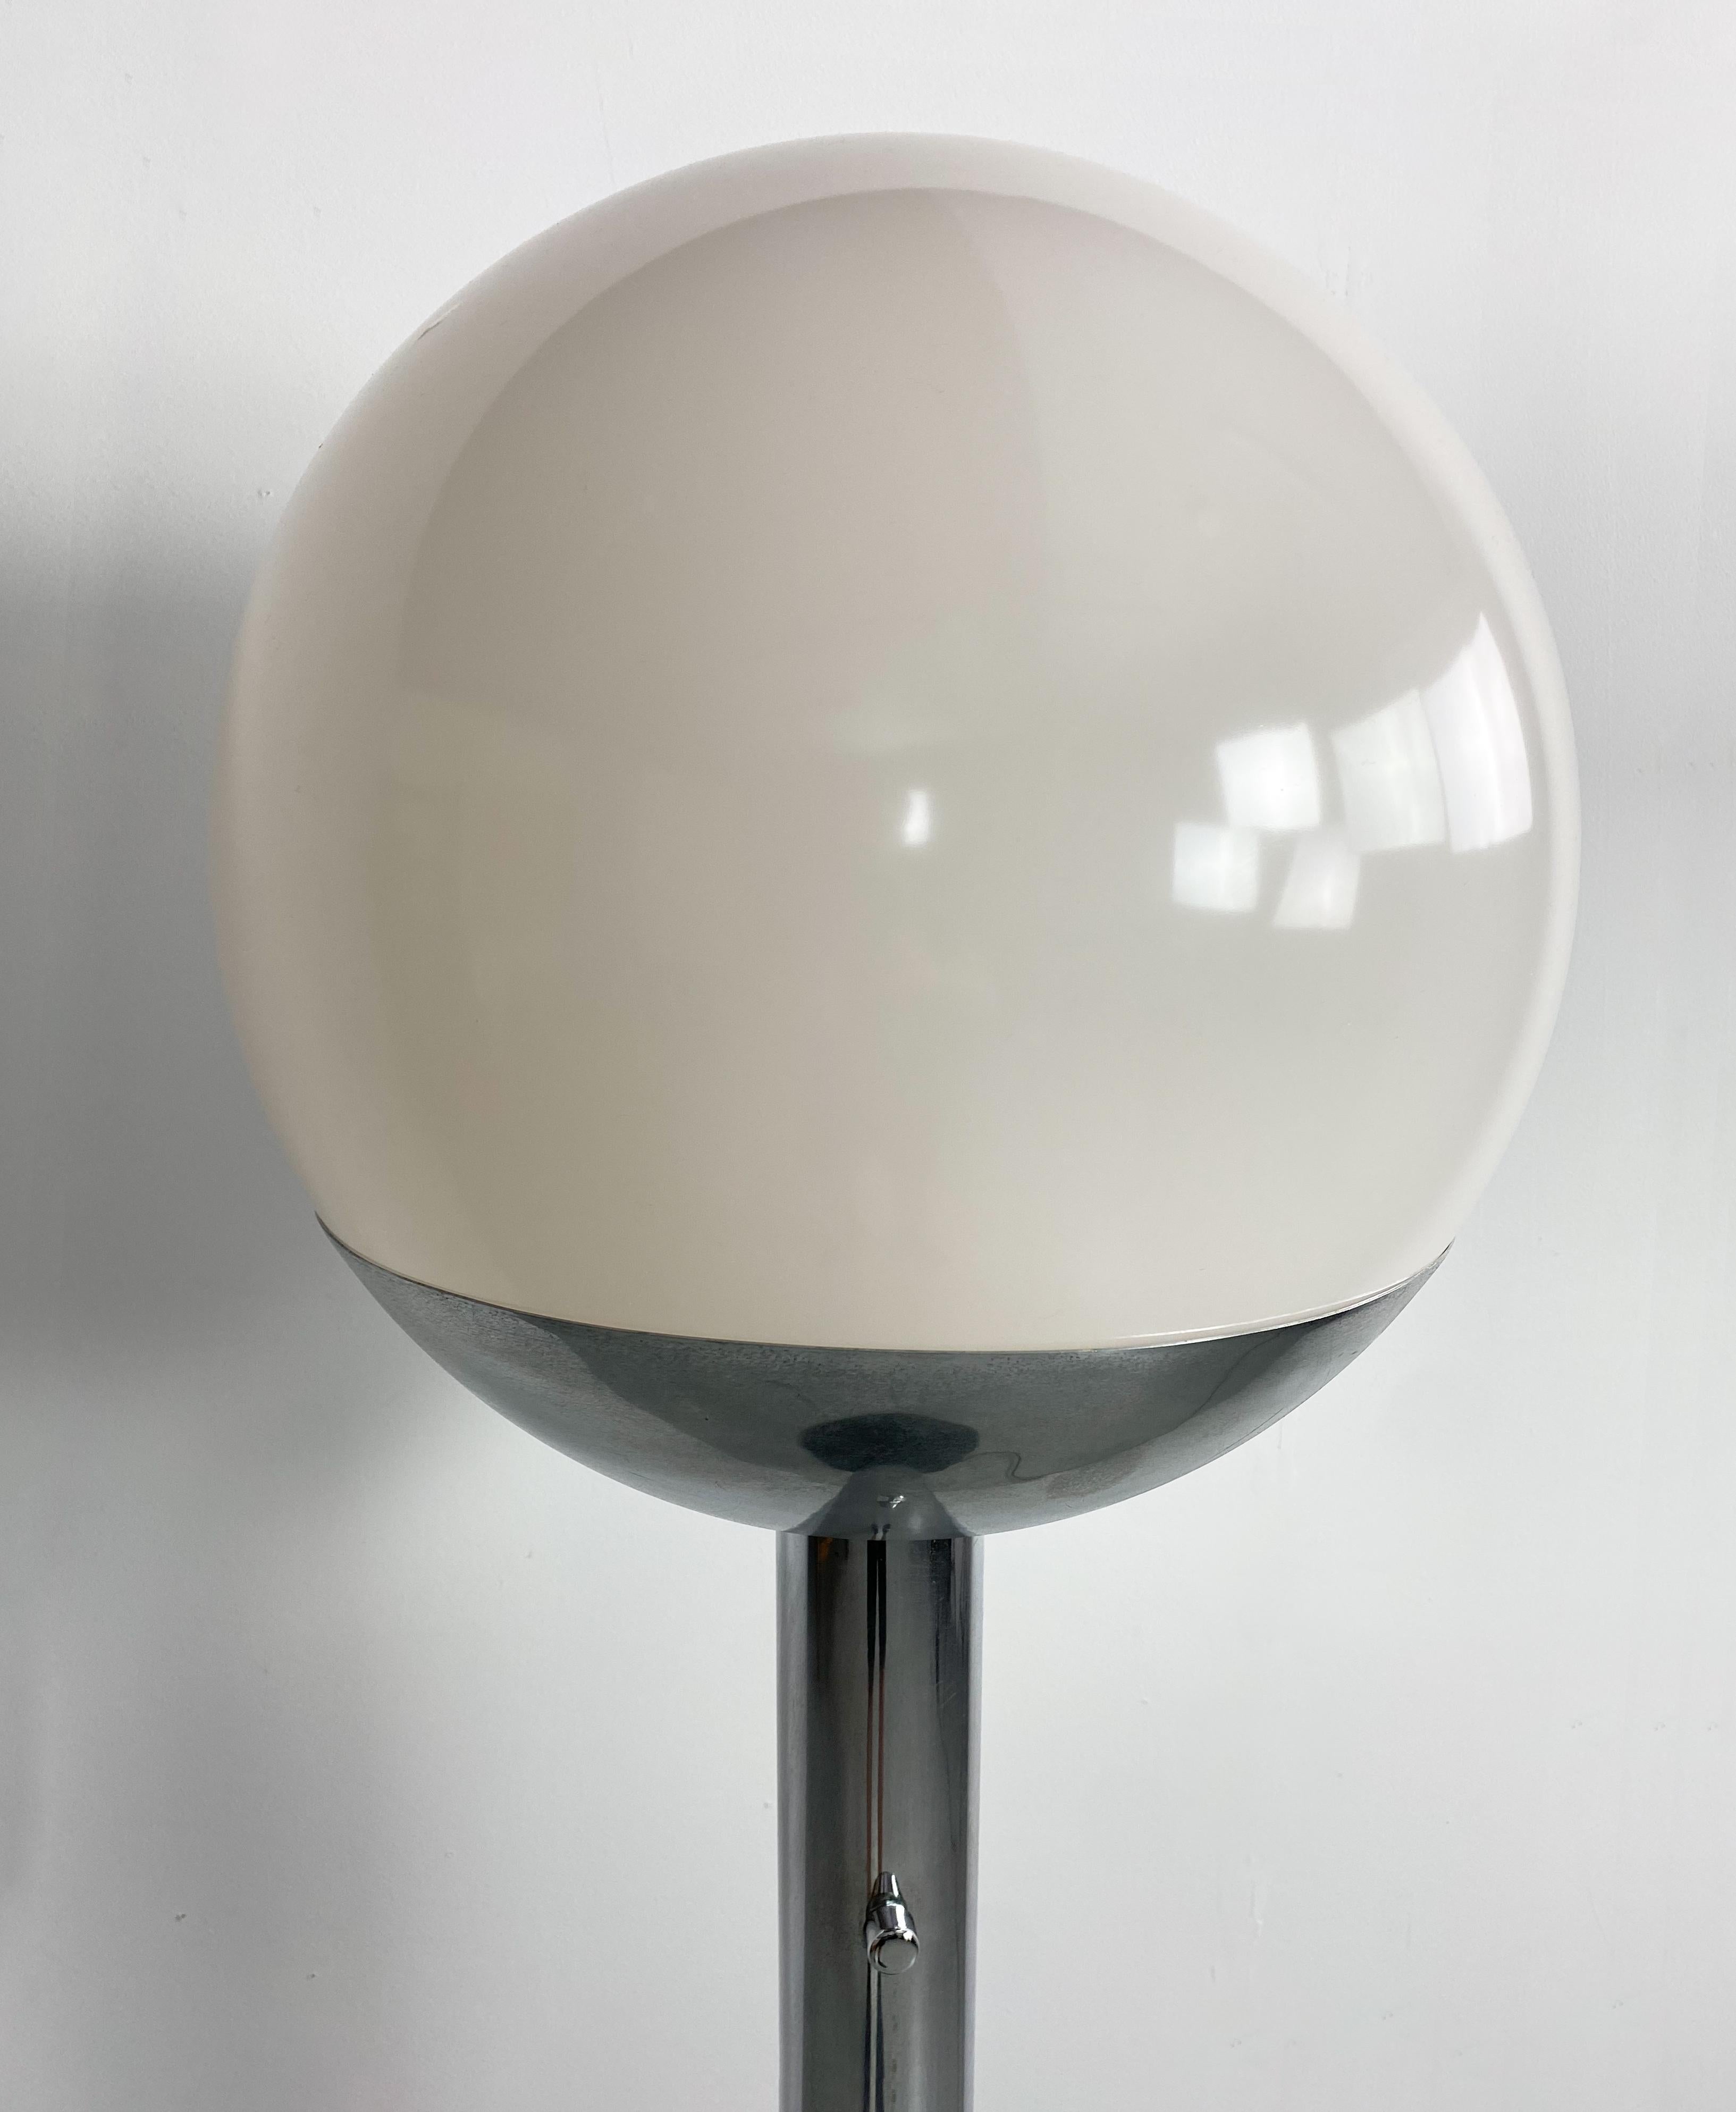 Chrome Globe Floor Lamp by Pia Guidetti Crippa for Luci, Italy, c.1970